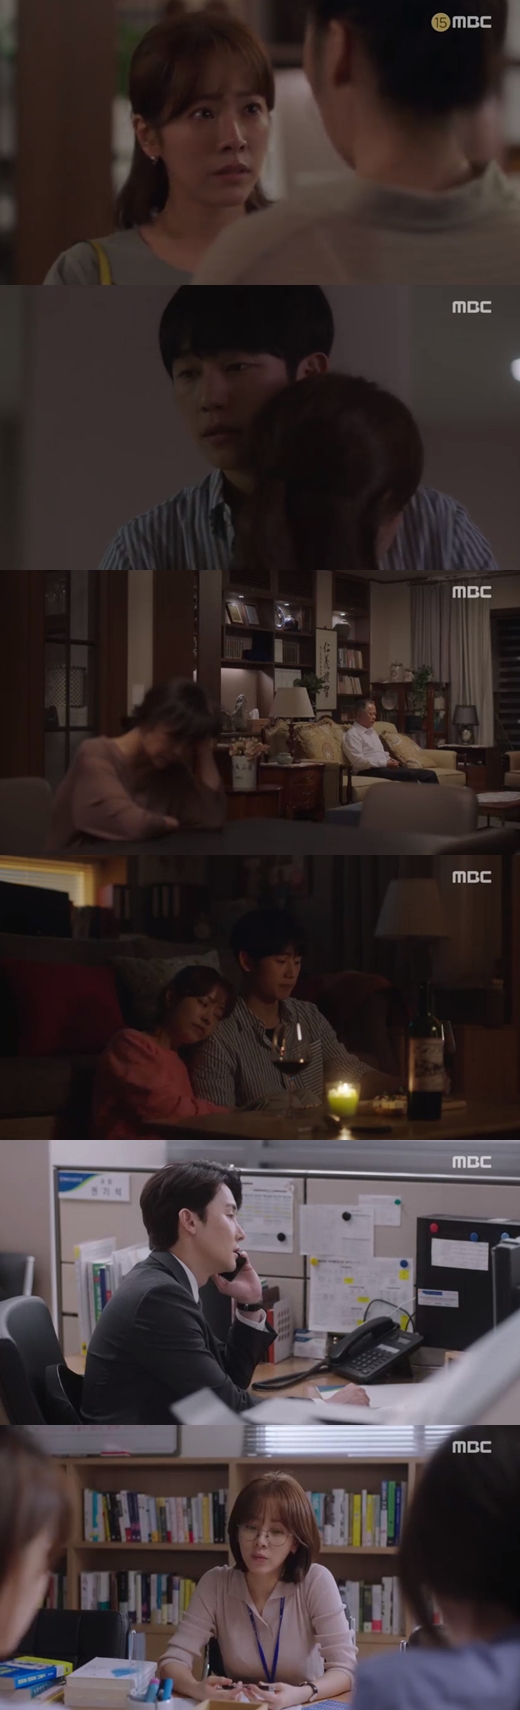 Spring Night Han Ji-min met Kim Chang-wan and made a discussion.In MBCs daily drama Spring Night (directed by Ahn Pan-seok, the playwright Kim Eun), which was broadcast on the 4th night, Lee Jung-in (Han Ji-min), who meets Kwon Young-guk (Kim Chang-wan) and builds a discussion, was portrayed.Lee Jeong-in came out fighting Lee Tae-hak (Song Seung-hwan) at home. Yoo Ji-Ho (Jung Hae-in) held Lee Jeong-in.Lee confessed, I met and thanked Mr. Ji-ho for having someone who could think before myself. And courage. Yoo Ji-Ho said, Its originally brave.Lee Jung-in said, I thought it was like that, but it was a brave pretend. Yoo Ji-Ho said, I am going through something that I do not have to meet with me.Lee Jeong-in ran the photos of his colleagues and Yoo Ji-Ho, who were secretly photographed. His colleagues believed that Kwon Ki-seok (Kim Jun-han) did this.My father guessed that, he said. Lee Jung-in contacted Kwon Ki-seok and recommended that he eat together at Kwon Ki-seoks fathers house.Lee met Kwon Ki-seoks father Kwon Young-guk and handed him a picture. Kwon Young-guk admitted that he had taken pictures of Yoo Ji-Ho and Lee Jung-in.It was unfairly photographed and uncomfortable to have it. Its all different. Lee Jung-in said, Its a hassle, but please send it to your workplace address. After that, Lee came out of the house of Kwon Young-guk. Kwon said he sent the photo to Lee Jung-in. Lee Jung-in asked, Do you think Im going to go back to my brother?Kwon said, Why did you meet me? Did I meet you without my background? I did not care much.I can not say that it is not love. Lee said, I was wrong. Lee said, I was wrong. Im sorry for betraying and hurting you. Im not asking you to forgive me.I will take it even if I curse and harass you for the rest of my life. Kwon said, What is Yoo Ji-Ho coming out like that? Kwon said, I do not need it all.Come back to your place. Lee Jung-in said, Now my brother is not enough. My greed has grown. 